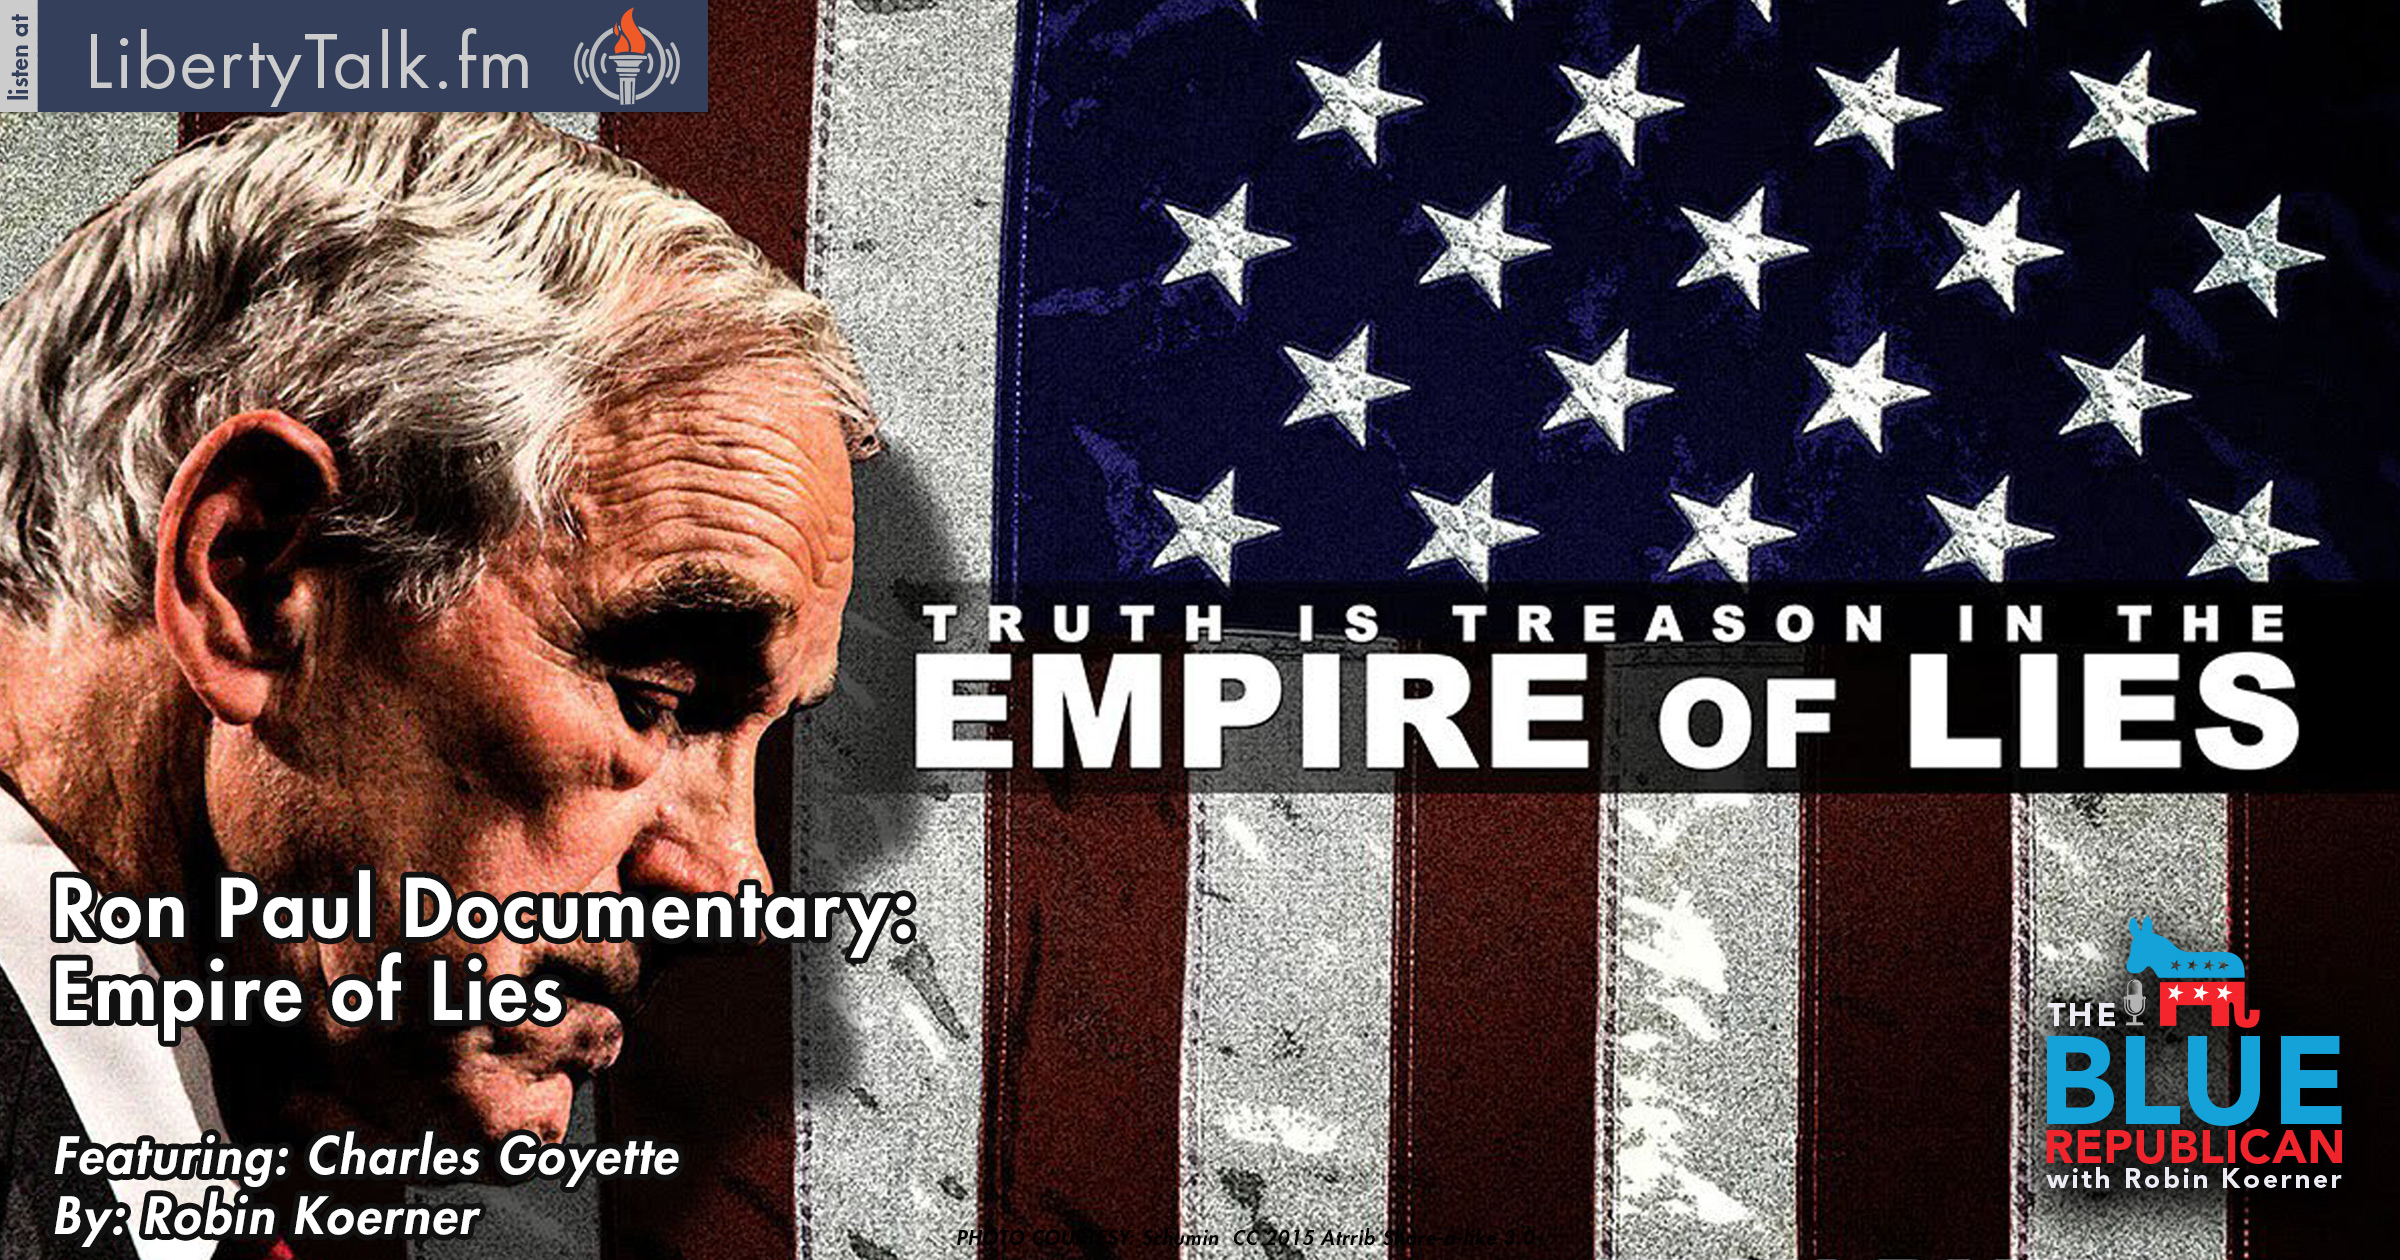 Ron Paul Documentary Empire of Lies featuring Charles Goyette